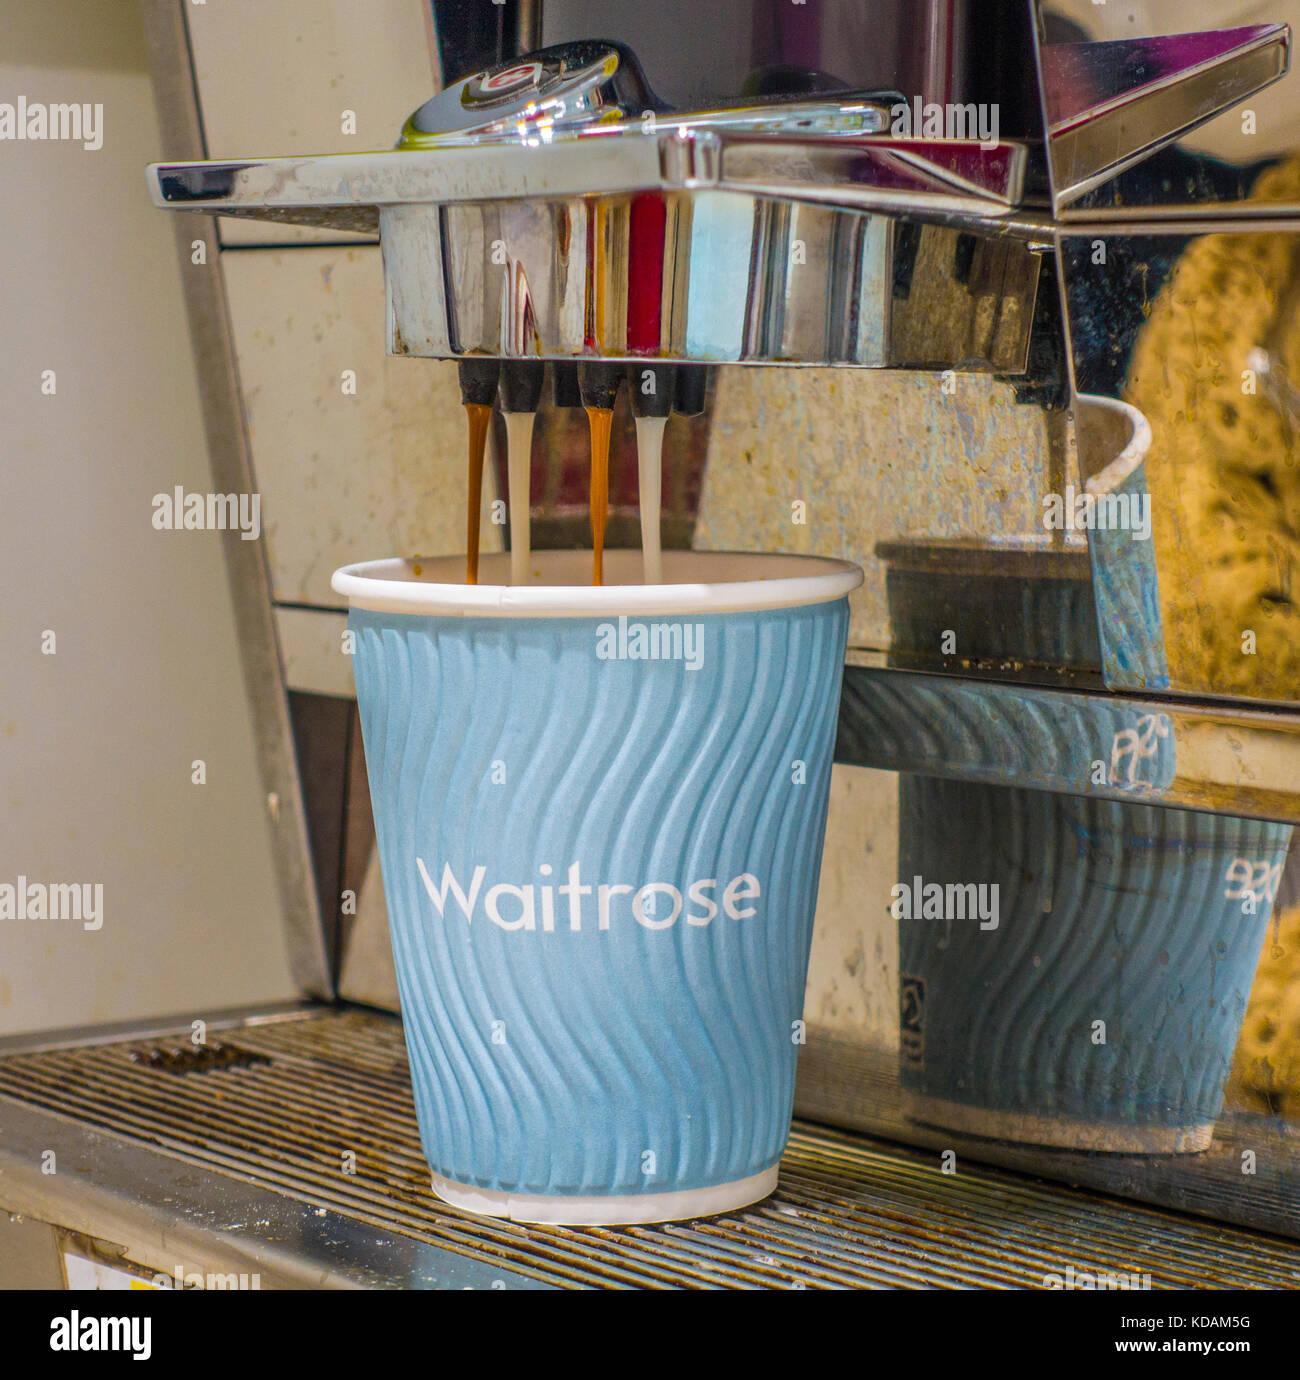 A paper cup filling with coffee which is flowing from a machine at the Peterborough branch of Waitrose supermarket, Cambridgeshire, England, UK. Stock Photo